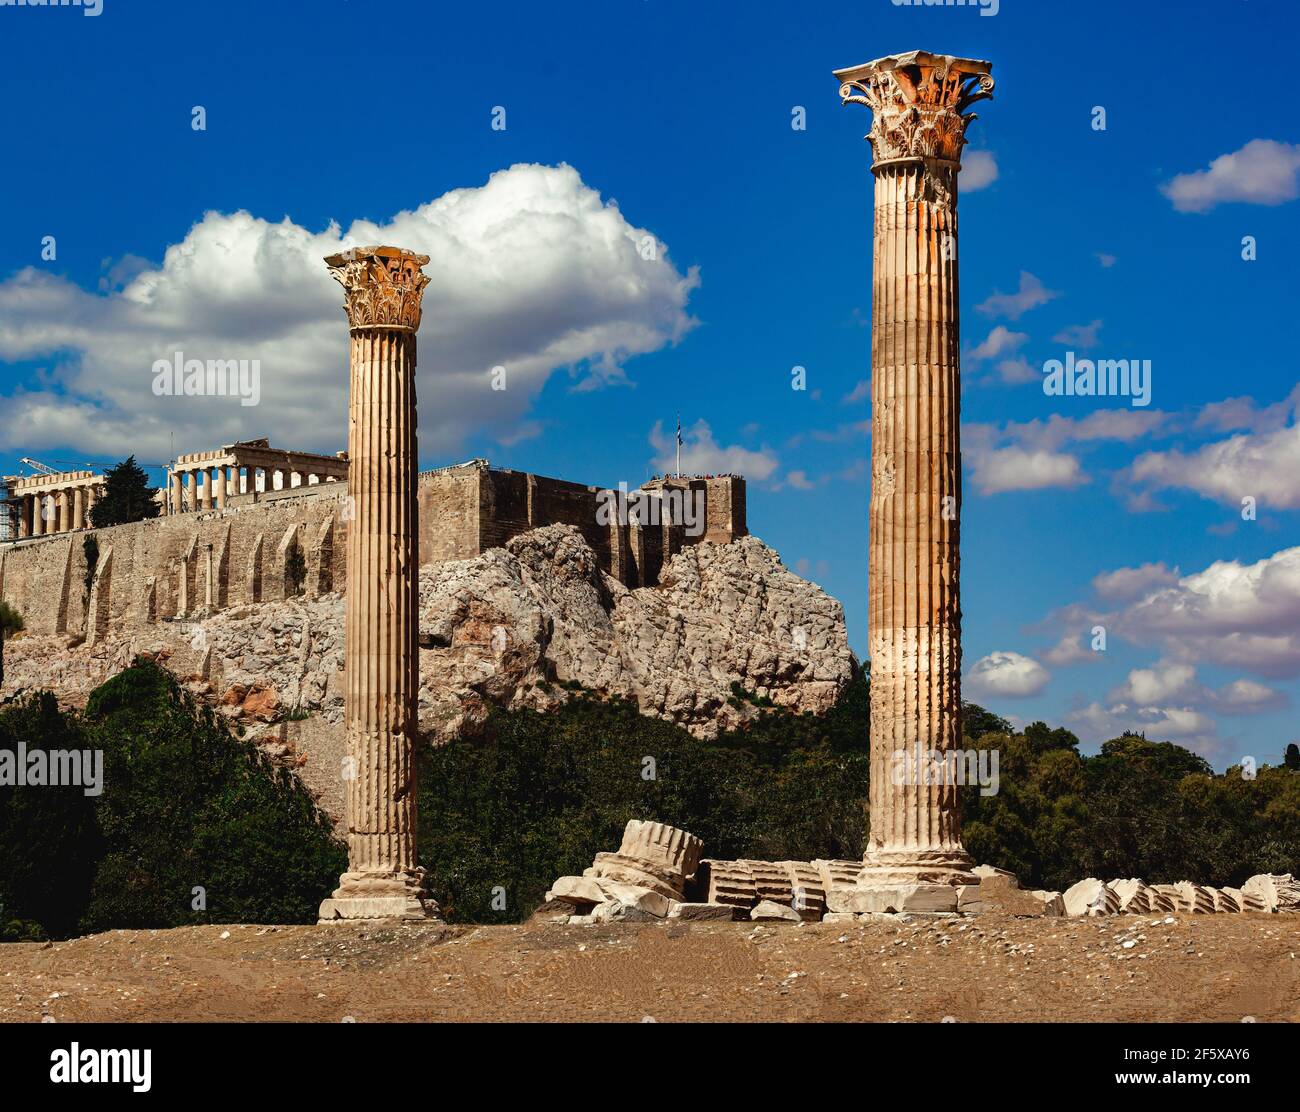 The Acropolis of Athens, an ancient citadel located on a rocky outcrop above the city of Athens, as seen from the ruins of the temple of Zeus. Stock Photo